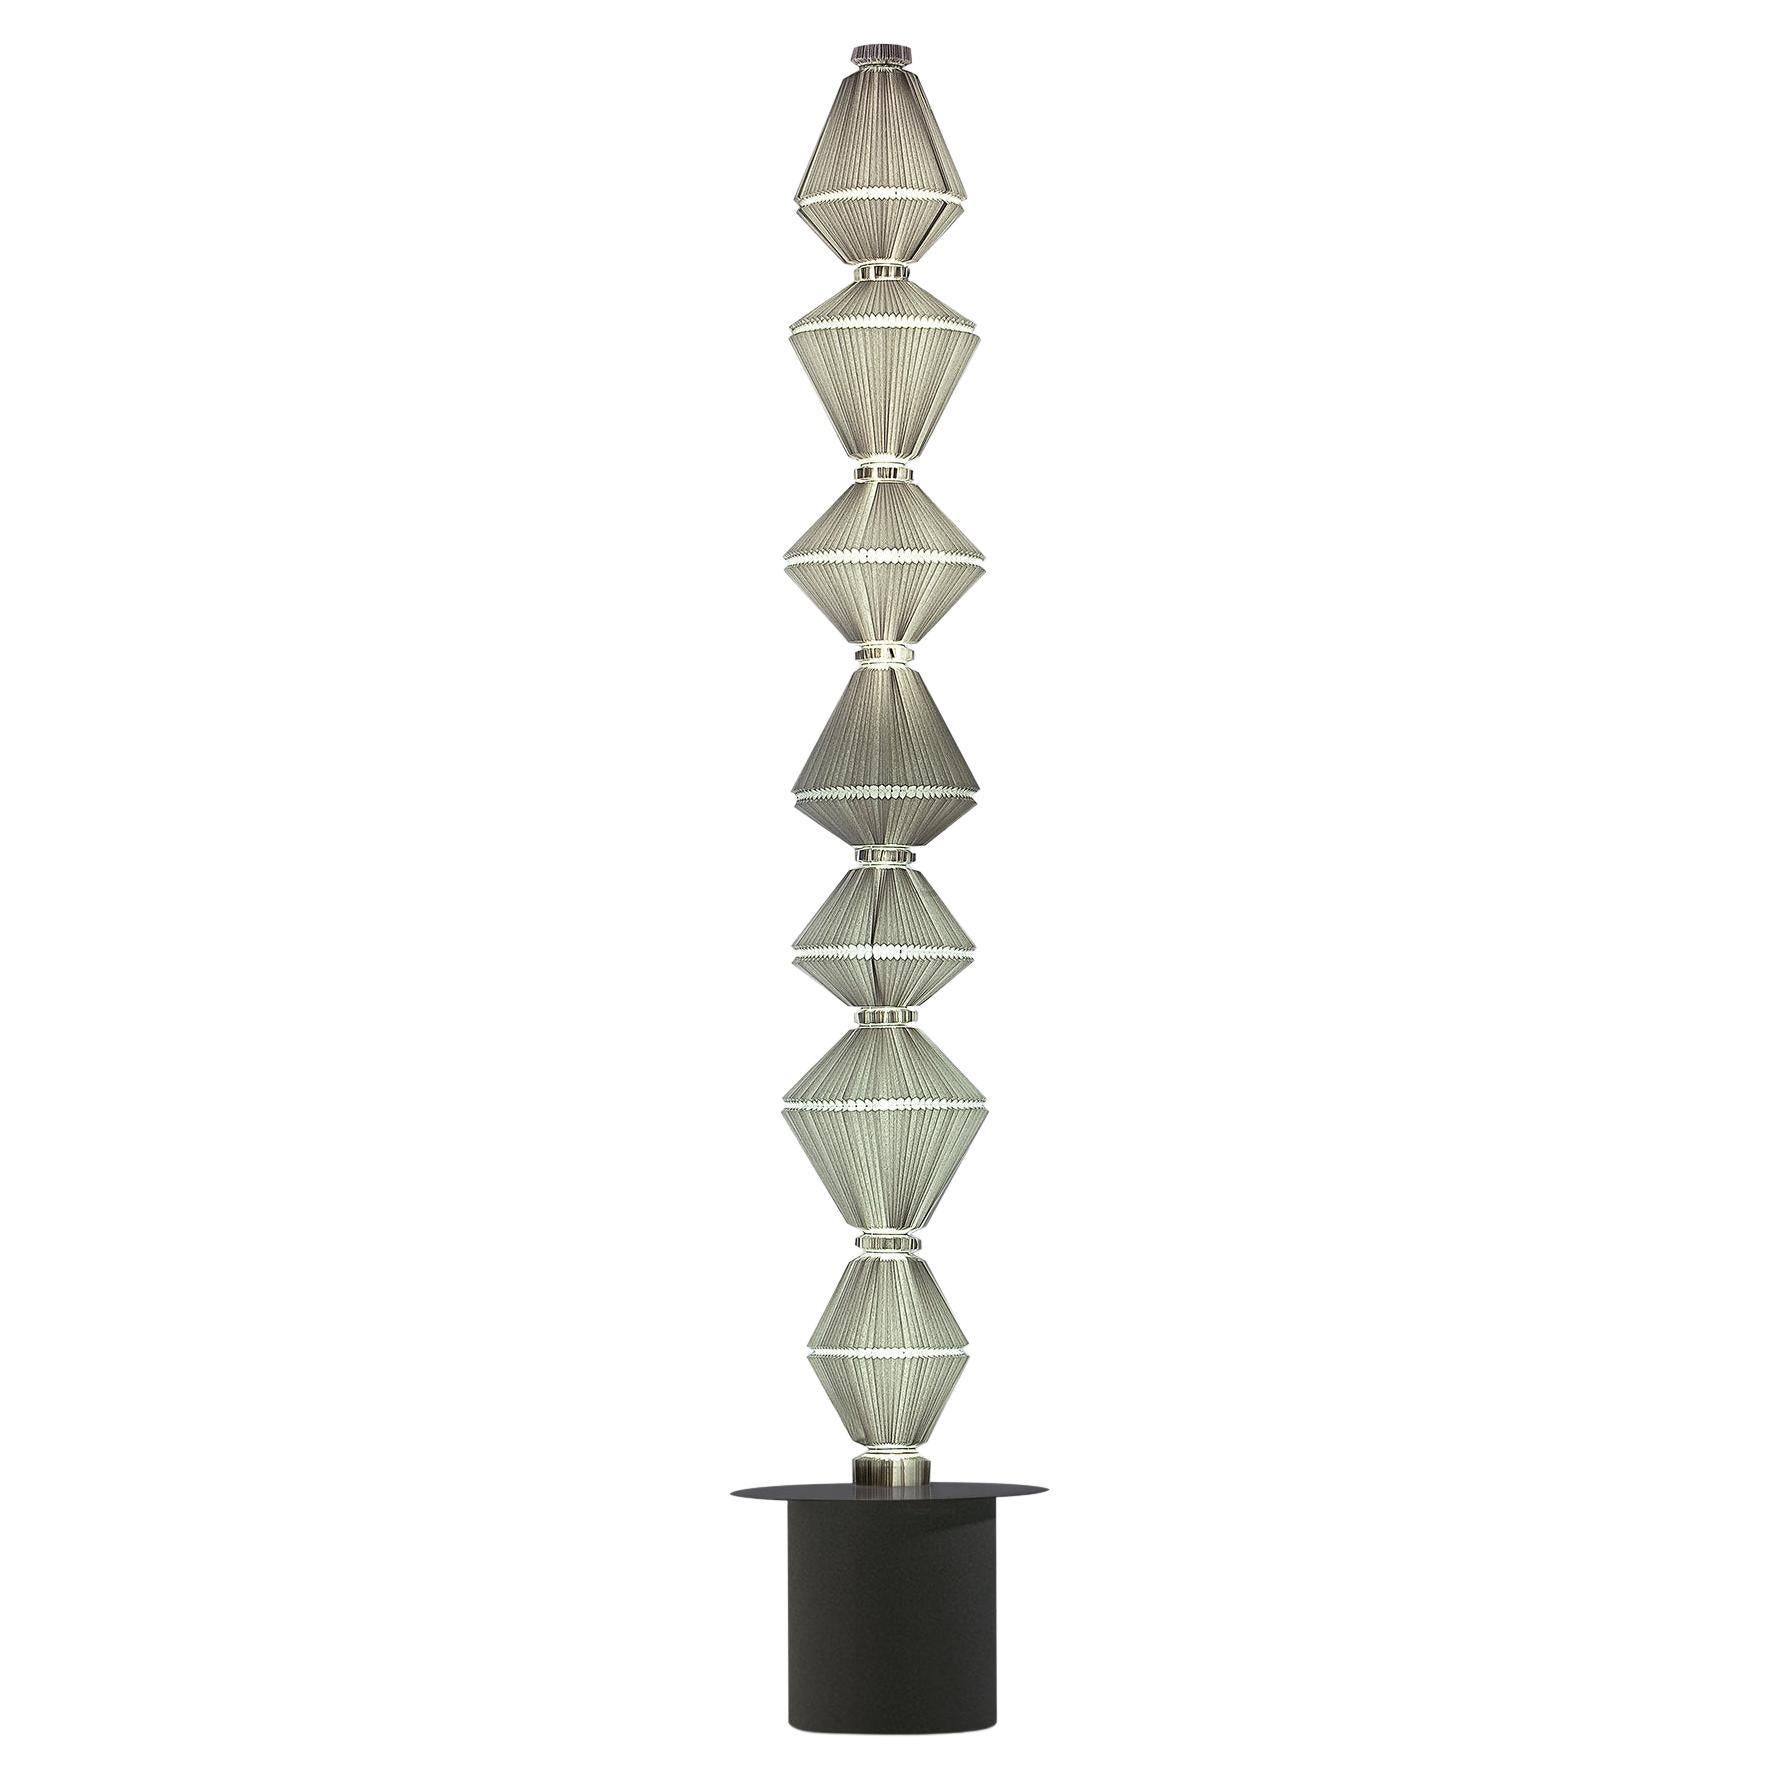 Oiphorique P GR Floor Lamp in Textile and Steel by Atelier Oi for Parachilna For Sale